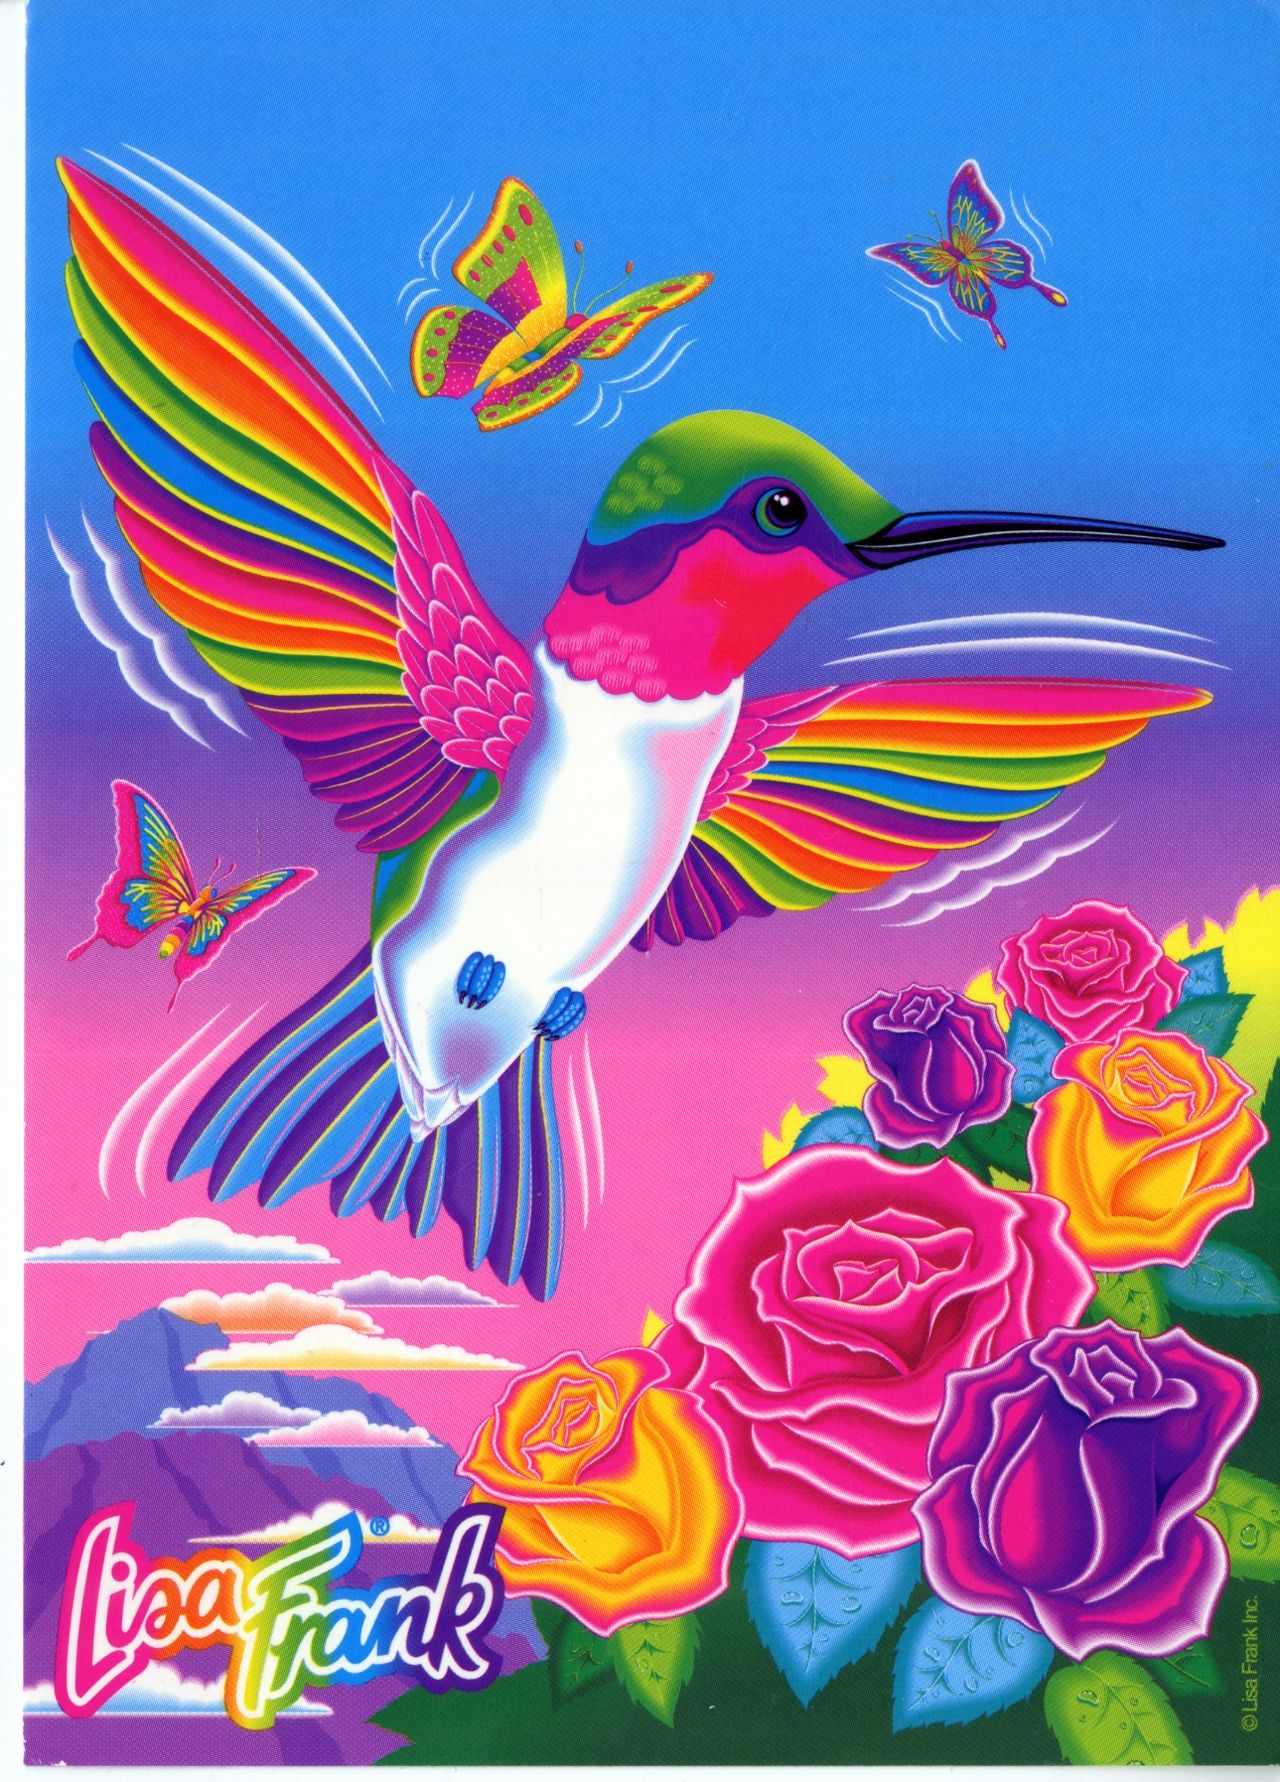 Top more than 57 lisa frank wallpapers super hot - in.cdgdbentre